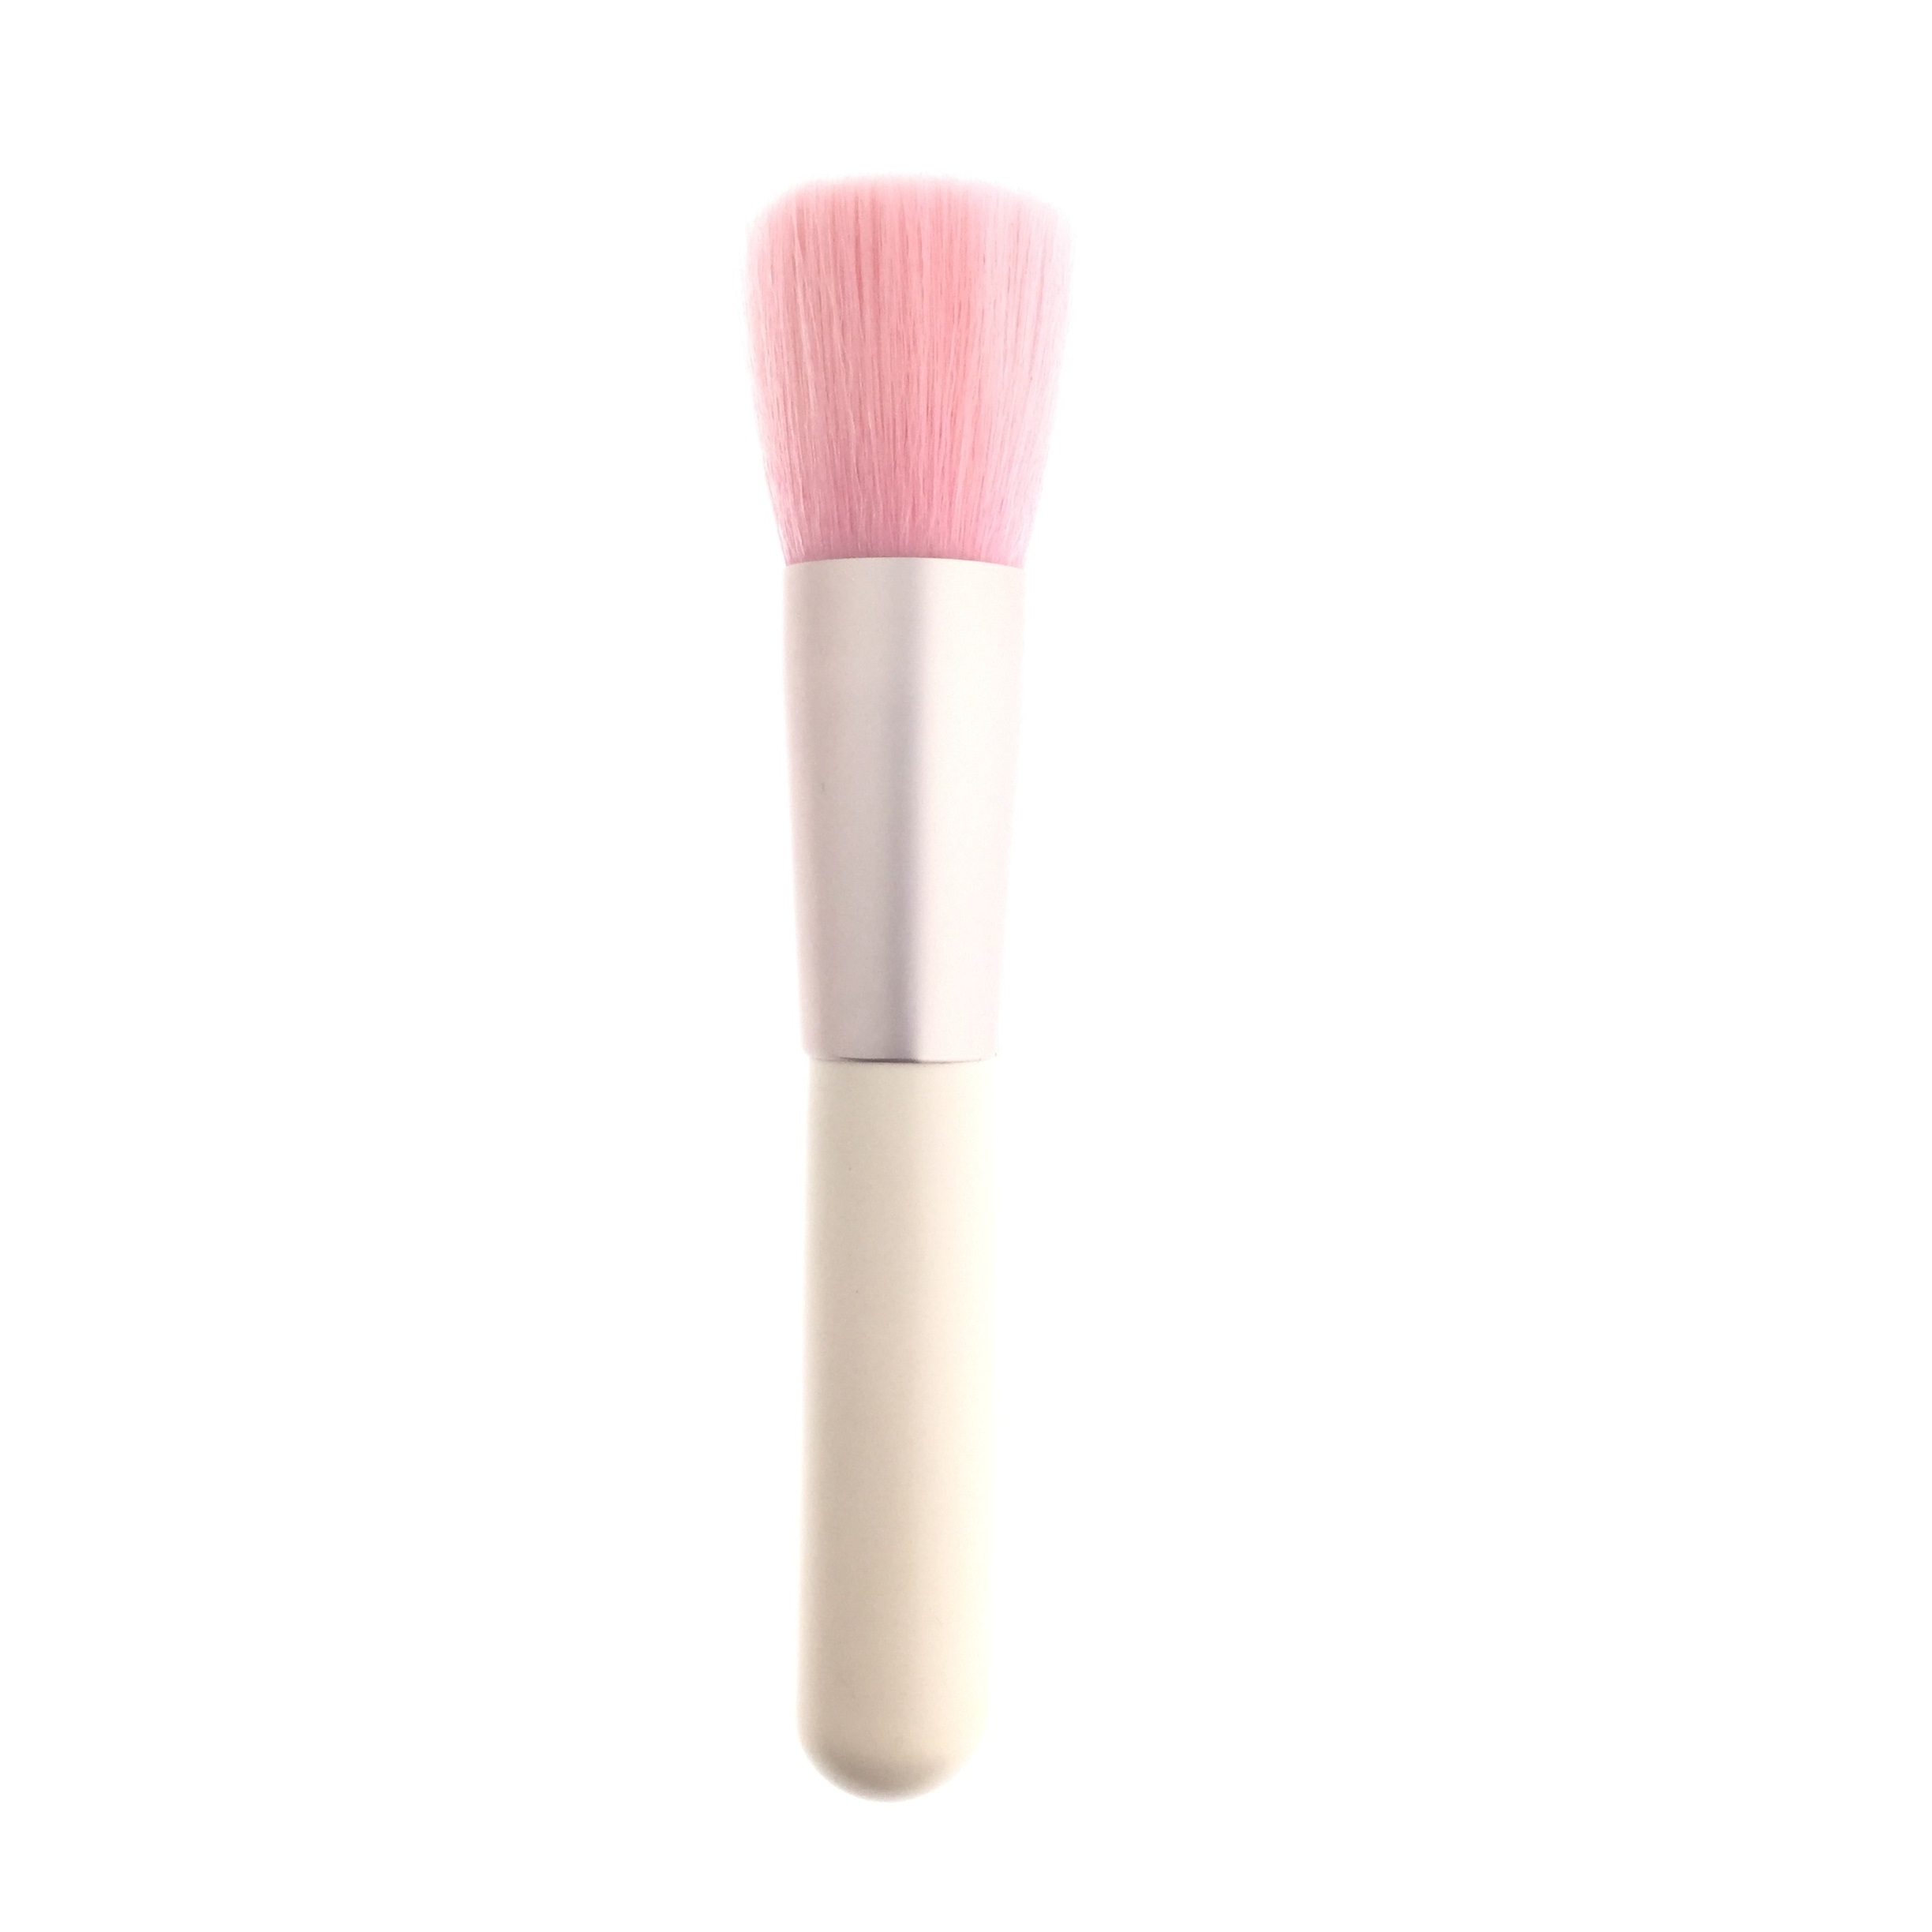 Multifunktions-Gesichts-Make-up-Pinsel mit Holzgriff (Rosa)